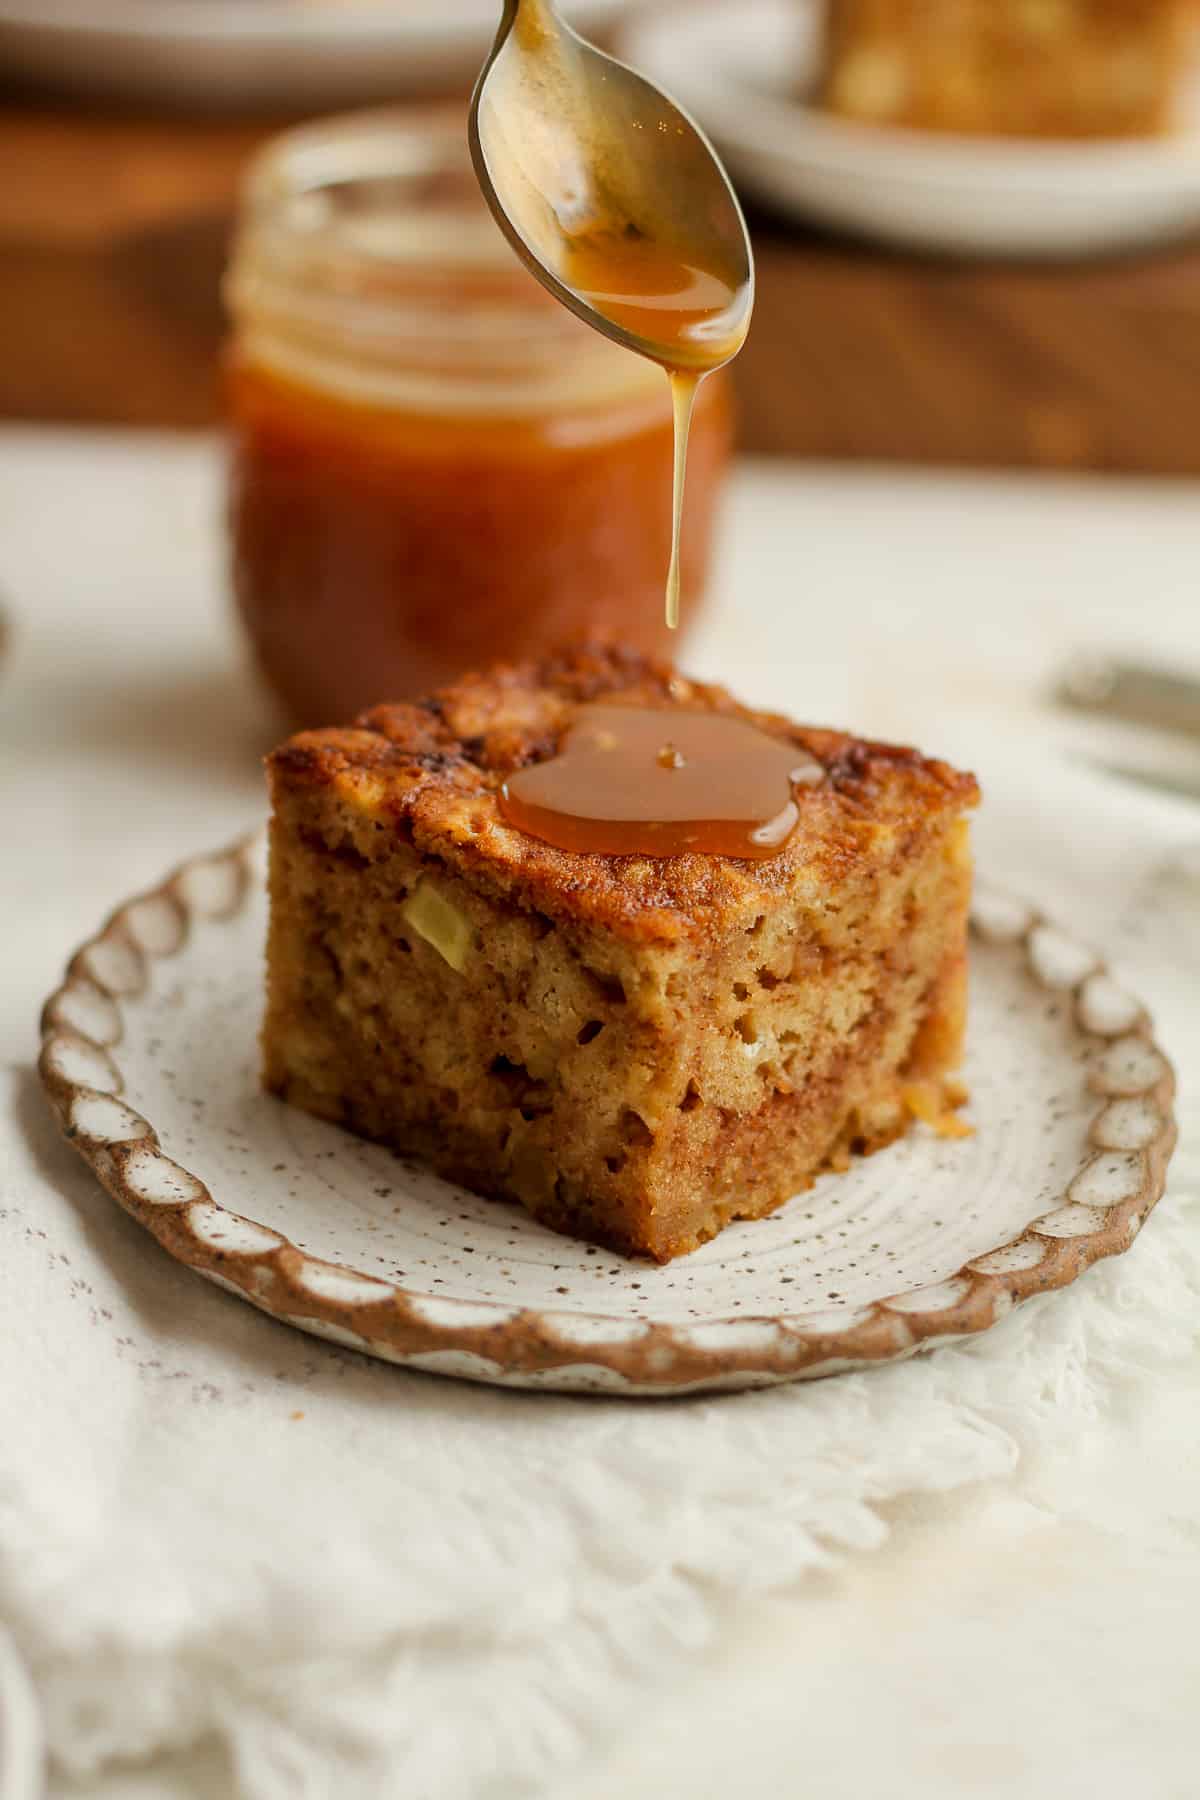 Side view of a slice of applesauce cake with a spoonful of caramel sauce drizzling on top.